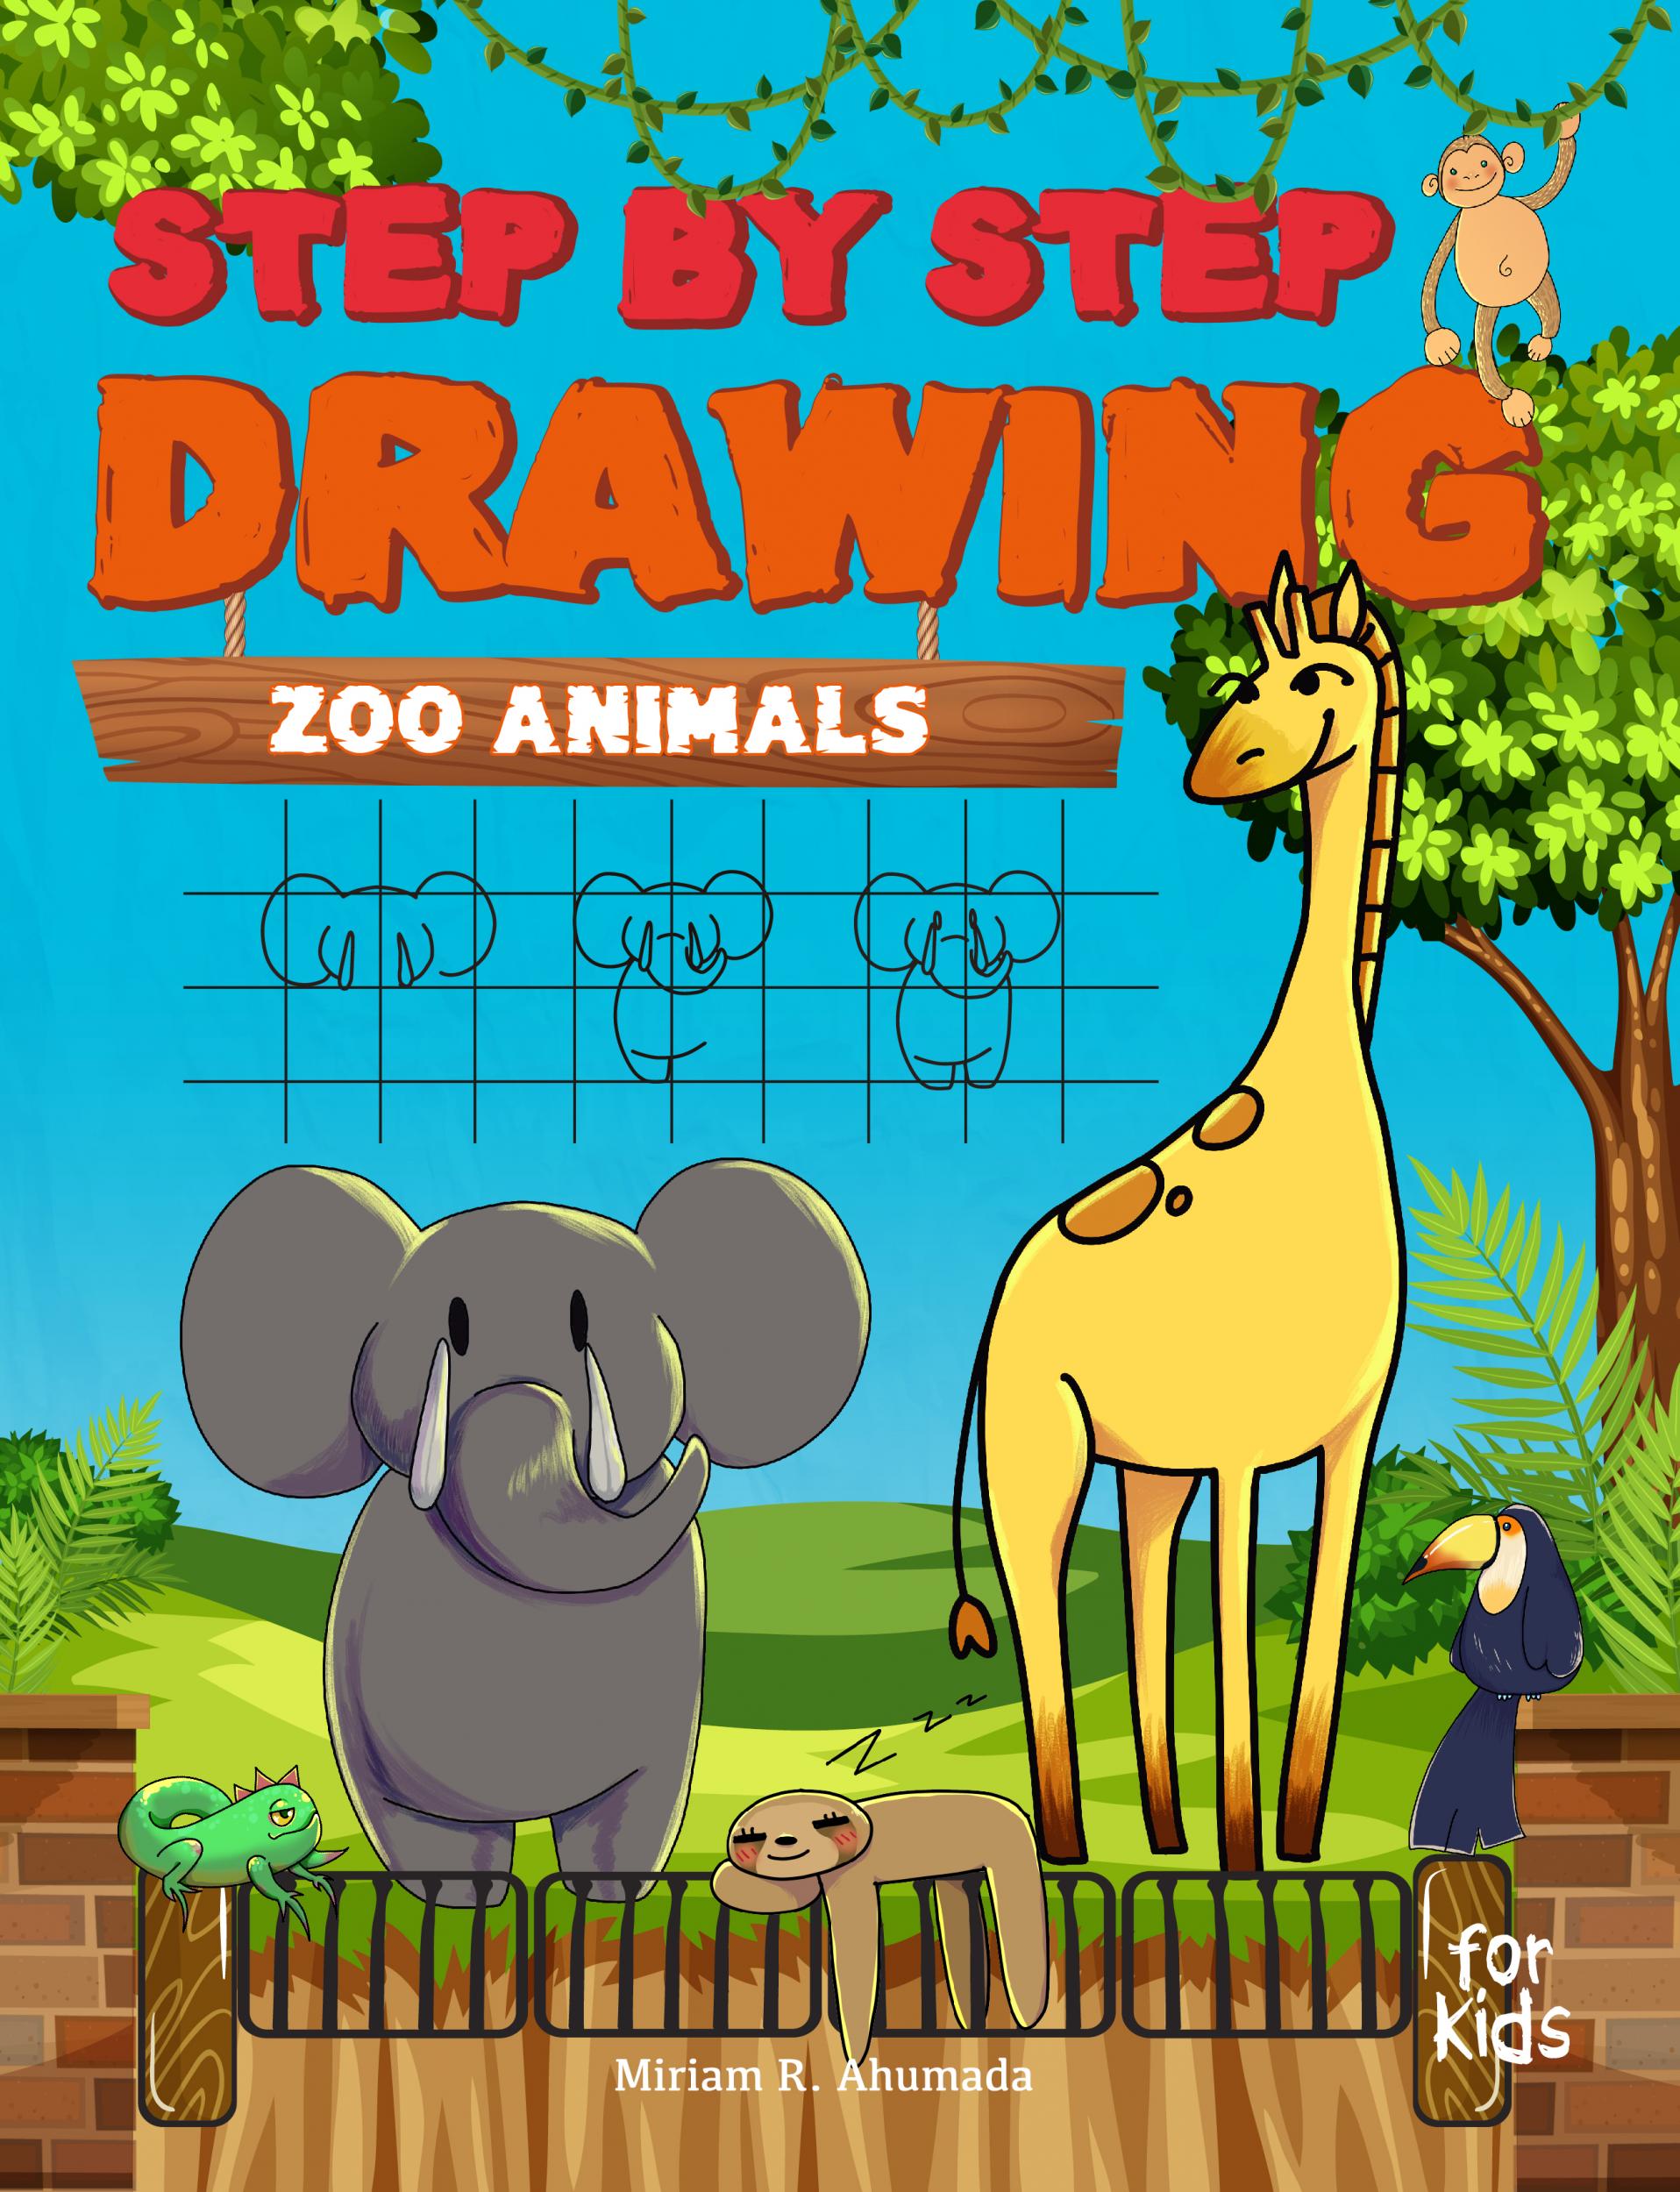 Get your free copy of Step by Step Drawing Zoo Animals for Kids by